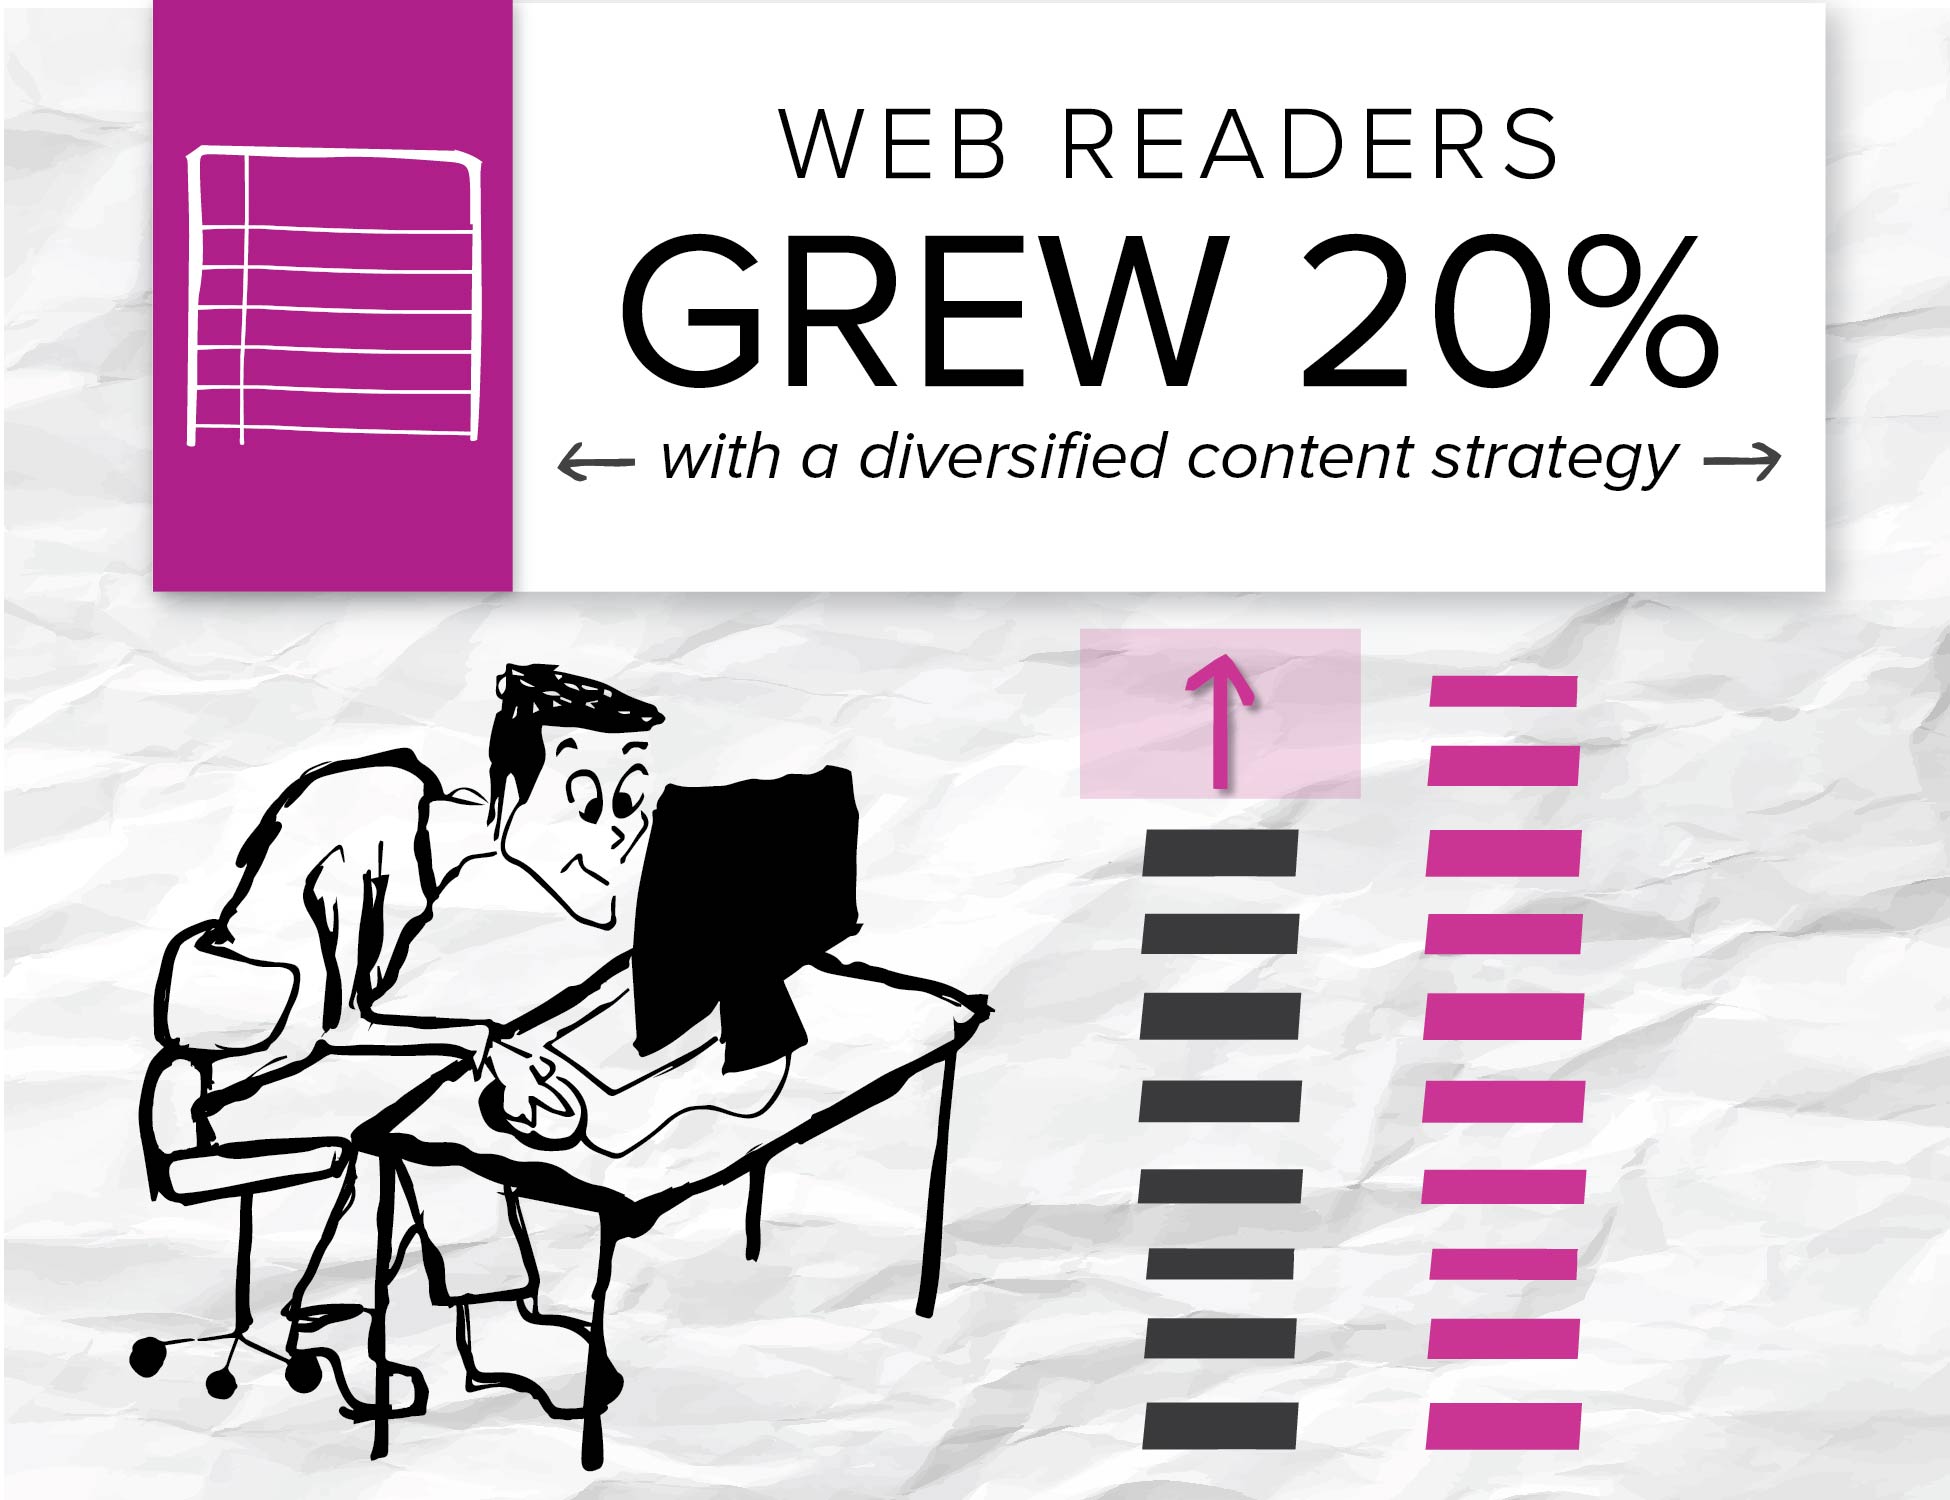 A client got 20 percent more readers when it diversified its content strategy for its website.